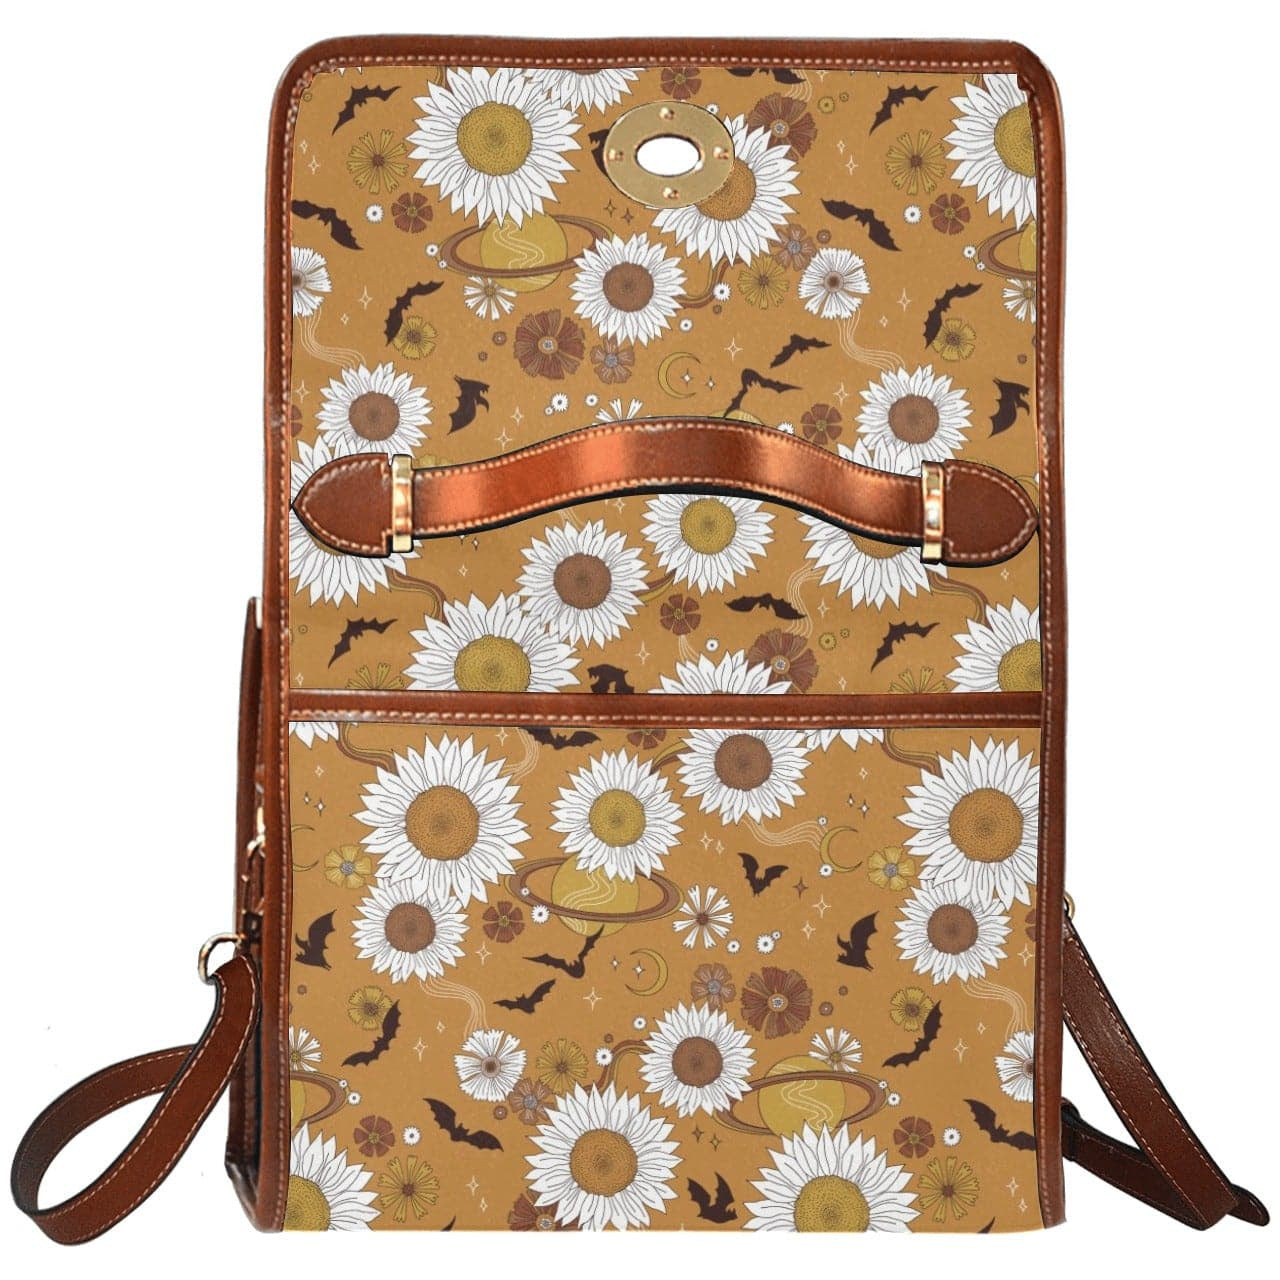 Bats and Sunflowers Canvas Bag